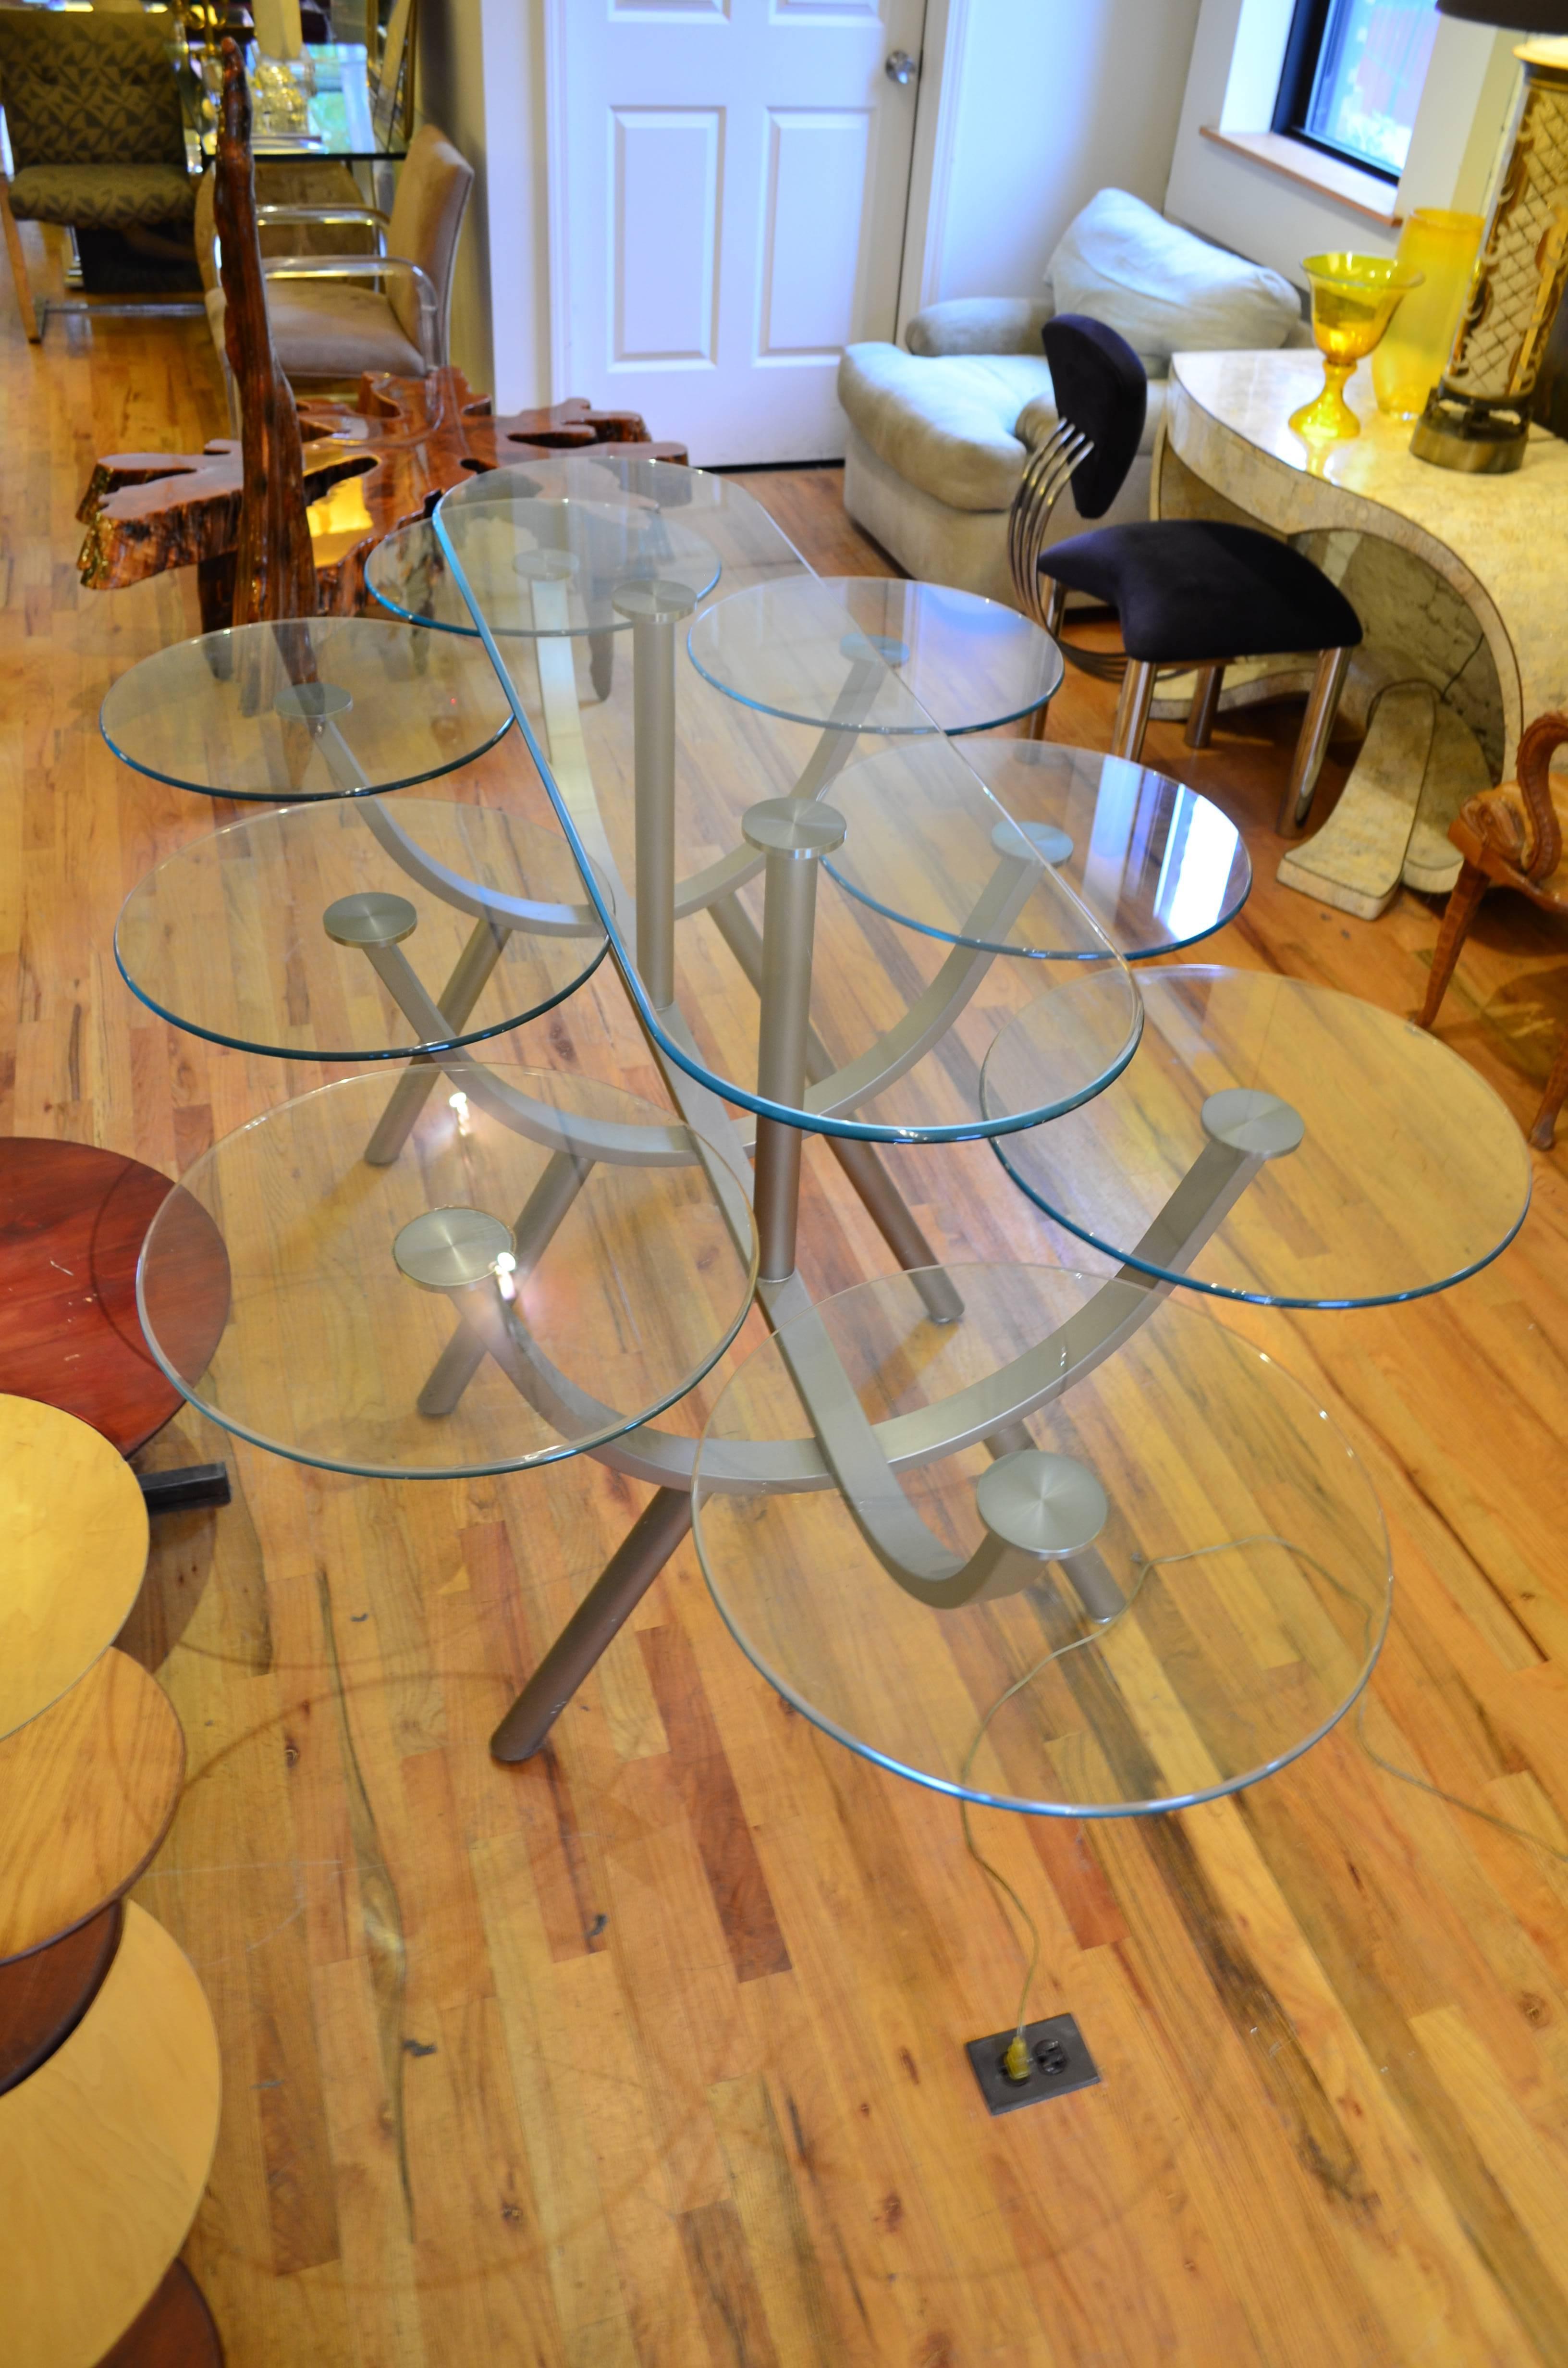 Glass Dining table from Design Institute of America's Circle of Life line.
The frame supports eight individual glass disks and one large 
raised center level which is 37 inches high. Dinner for eight.
Very good vintage condition with no chips or